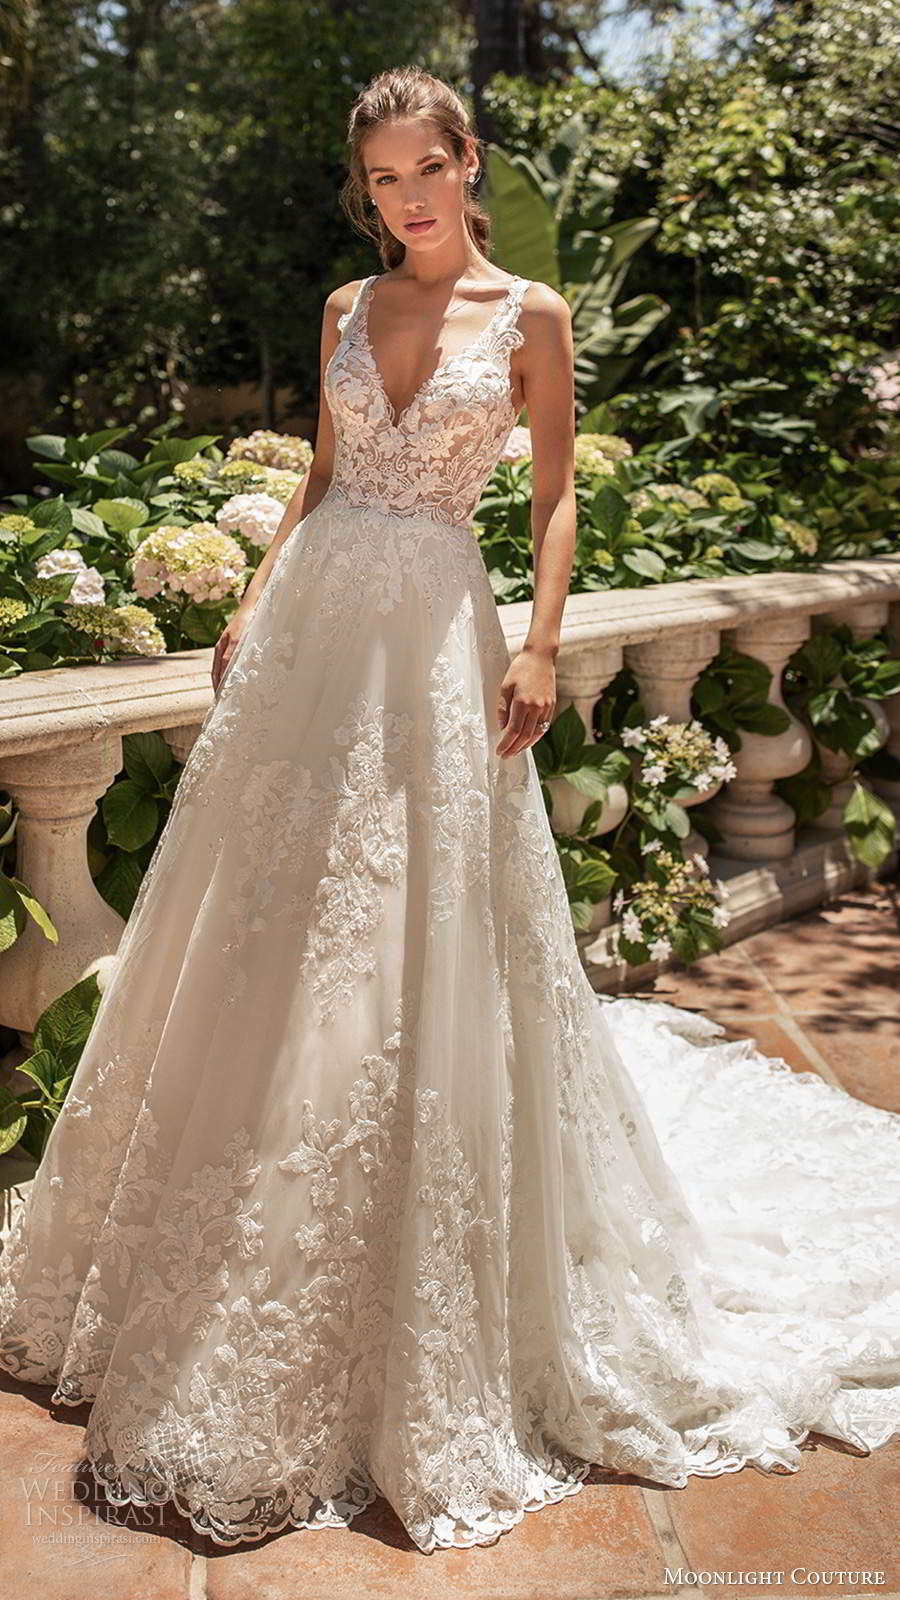 moonlight couture spring 2020 bridal sleeveless illusion straps v neckline fully embellished a line ball gown wedding dress keyhole back chapel train (9) mv